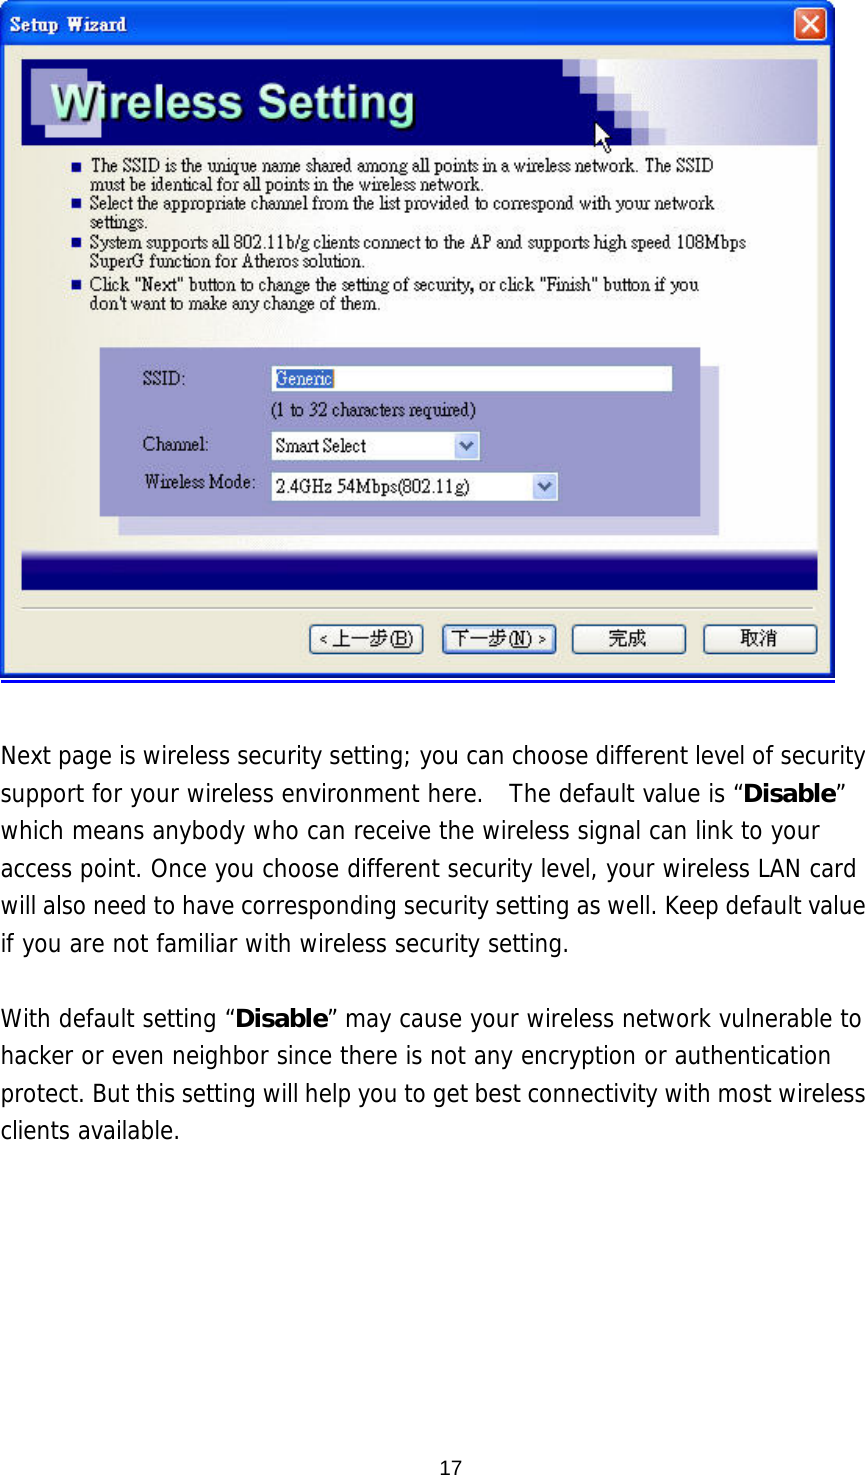   Next page is wireless security setting; you can choose different level of security support for your wireless environment here.  The default value is “Disable” which means anybody who can receive the wireless signal can link to your access point. Once you choose different security level, your wireless LAN card will also need to have corresponding security setting as well. Keep default value if you are not familiar with wireless security setting.   With default setting “Disable” may cause your wireless network vulnerable to hacker or even neighbor since there is not any encryption or authentication protect. But this setting will help you to get best connectivity with most wireless clients available.    17